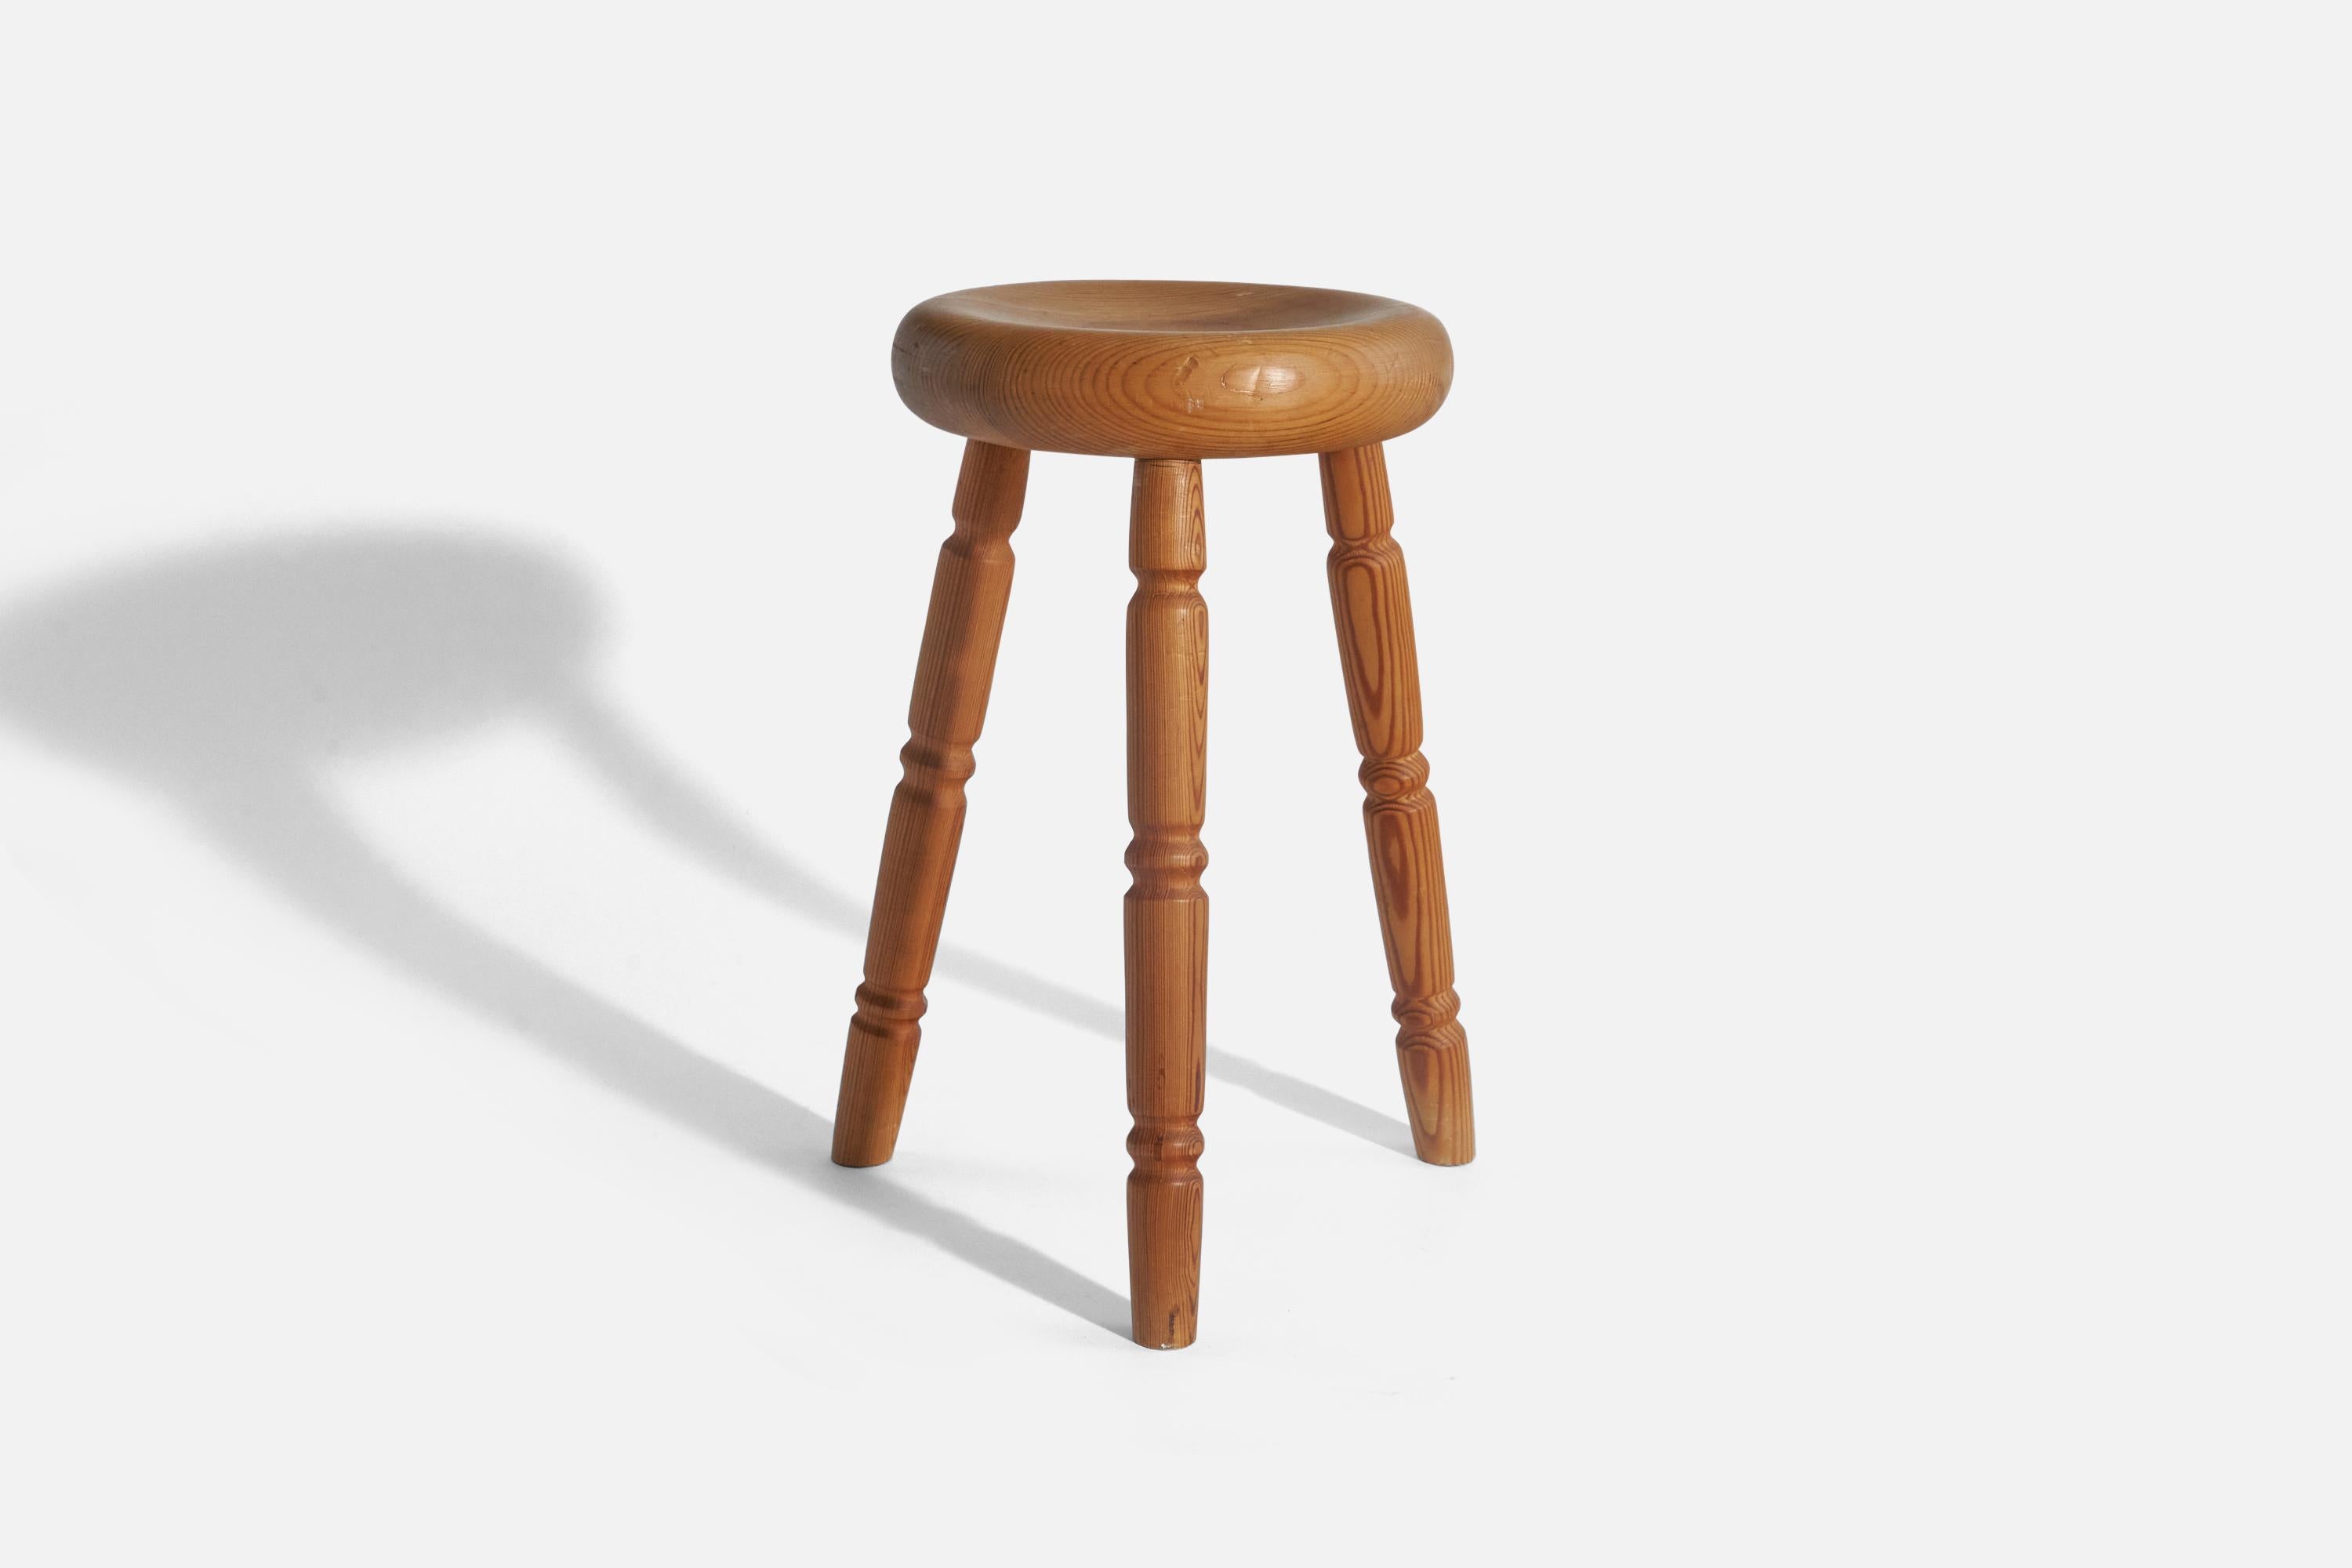 A solid pine stool designed and produced in Sweden, c. 1970s.